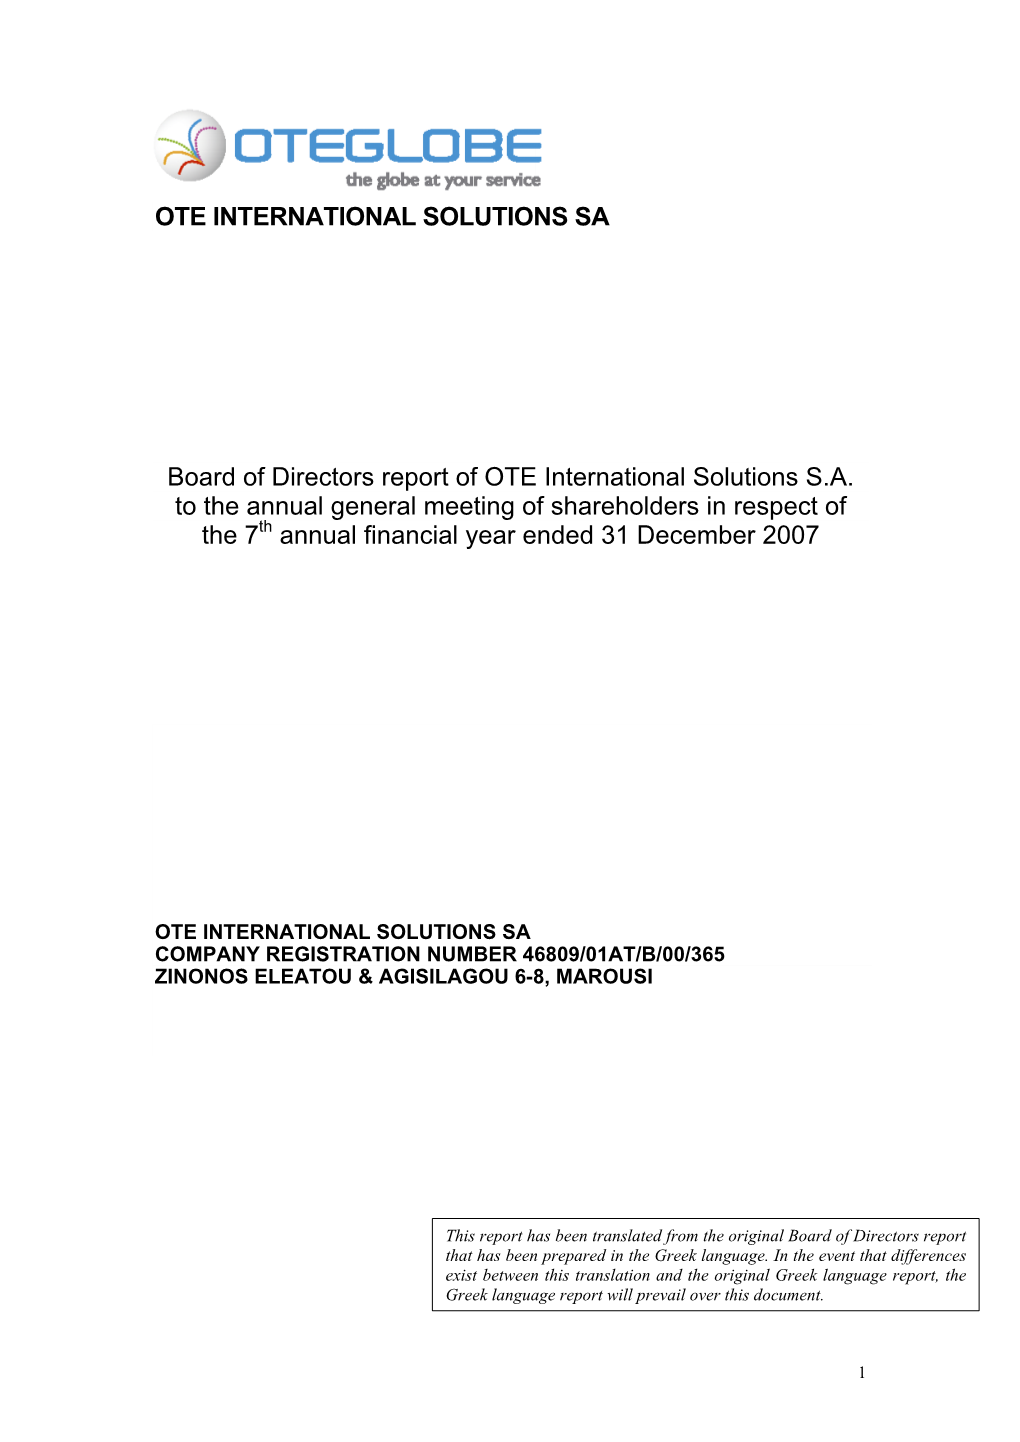 Report of the Board of Directors of Ote International Solutions Sa